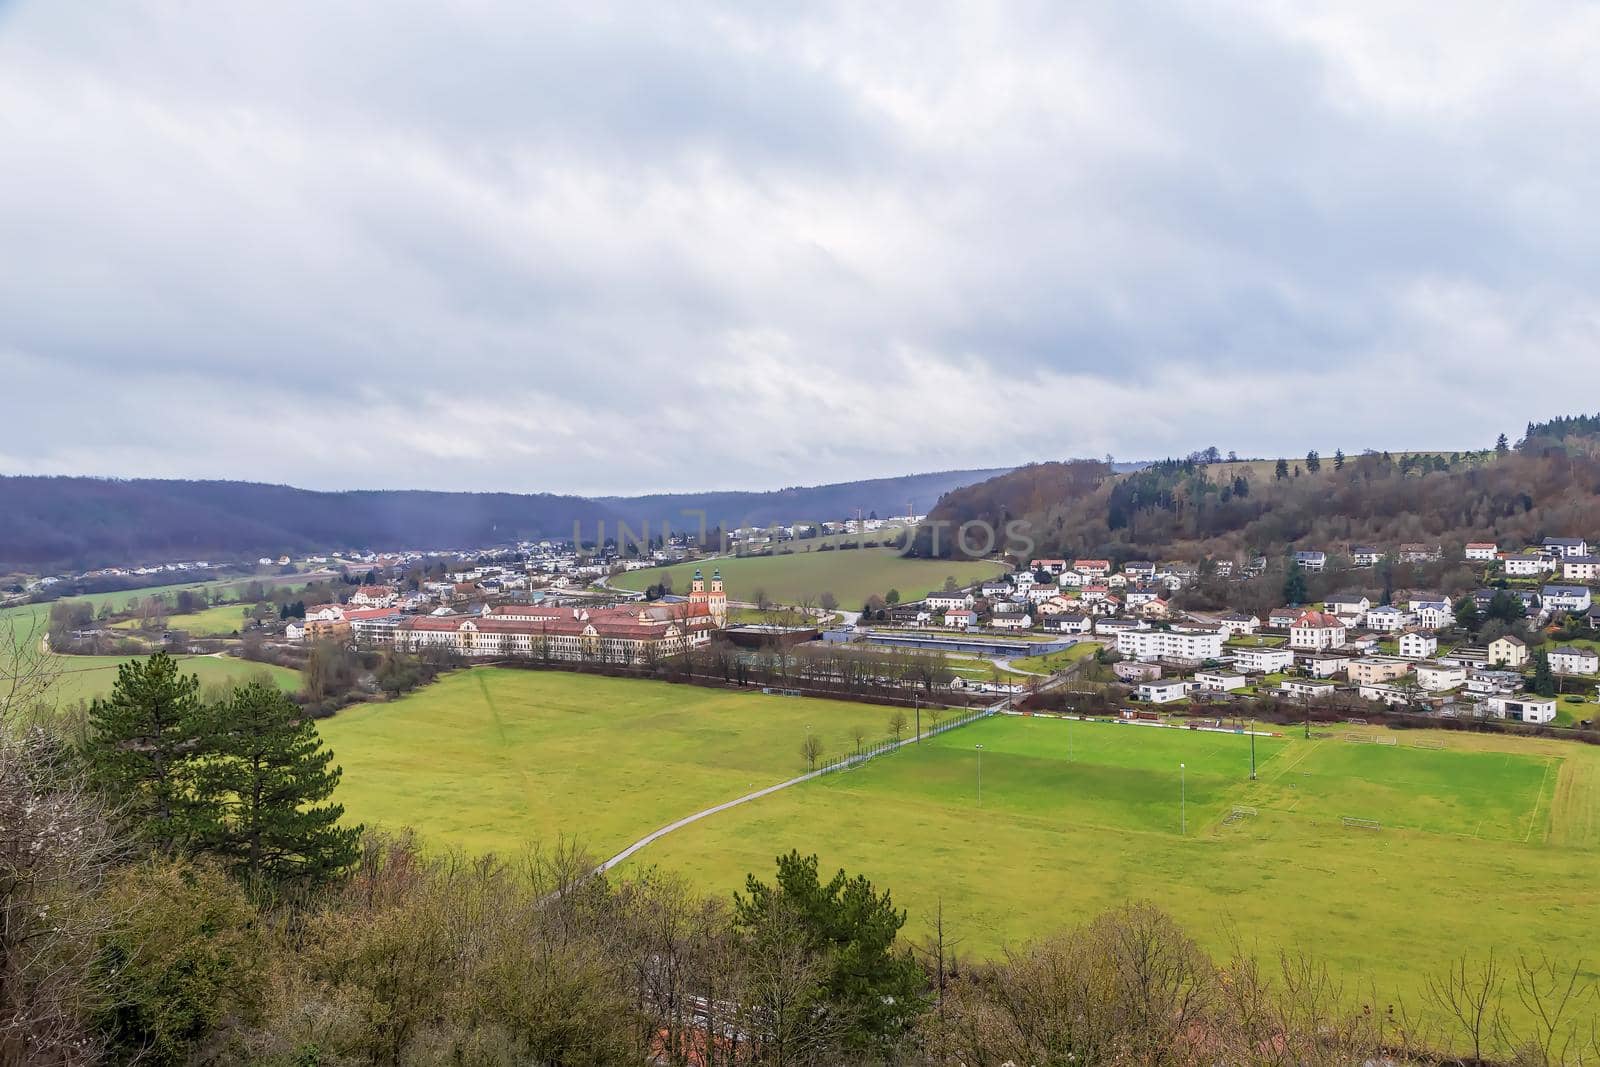 View of Monastery Rebdorf from Willibaldsburg hill, Germany